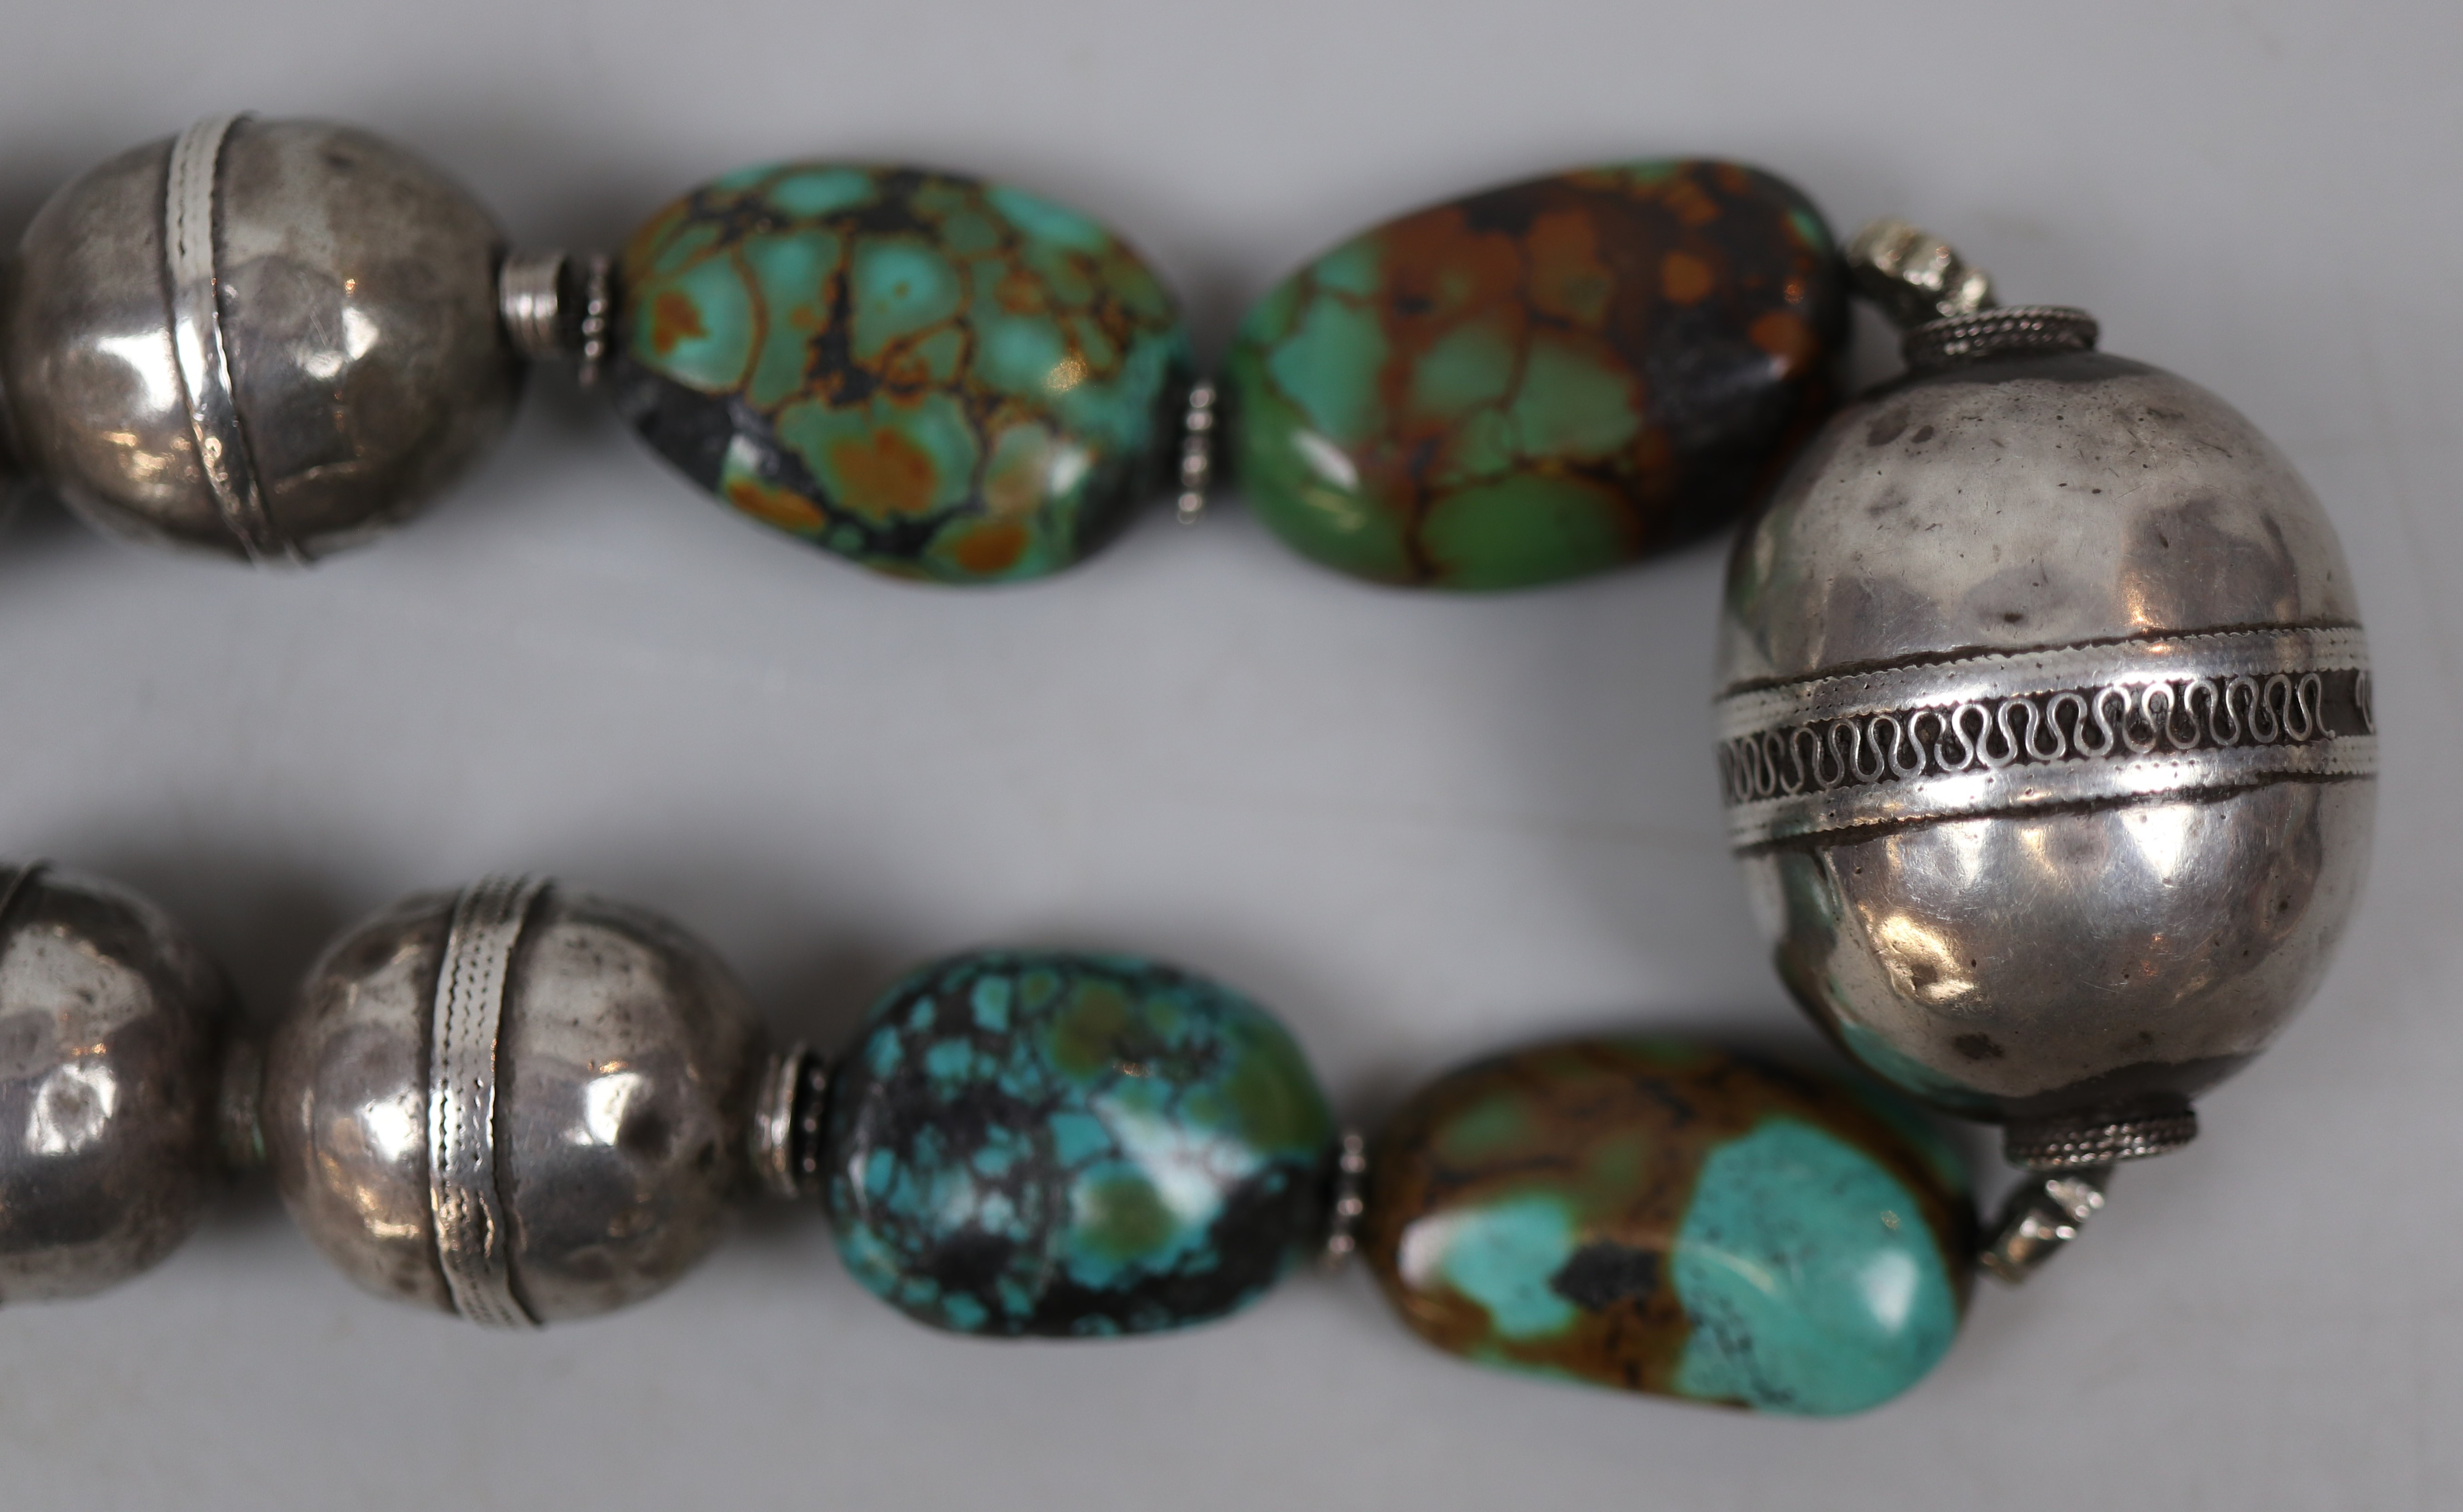 Vintage Himalayan / Tibet silver & turquoise necklaces - Image 7 of 7